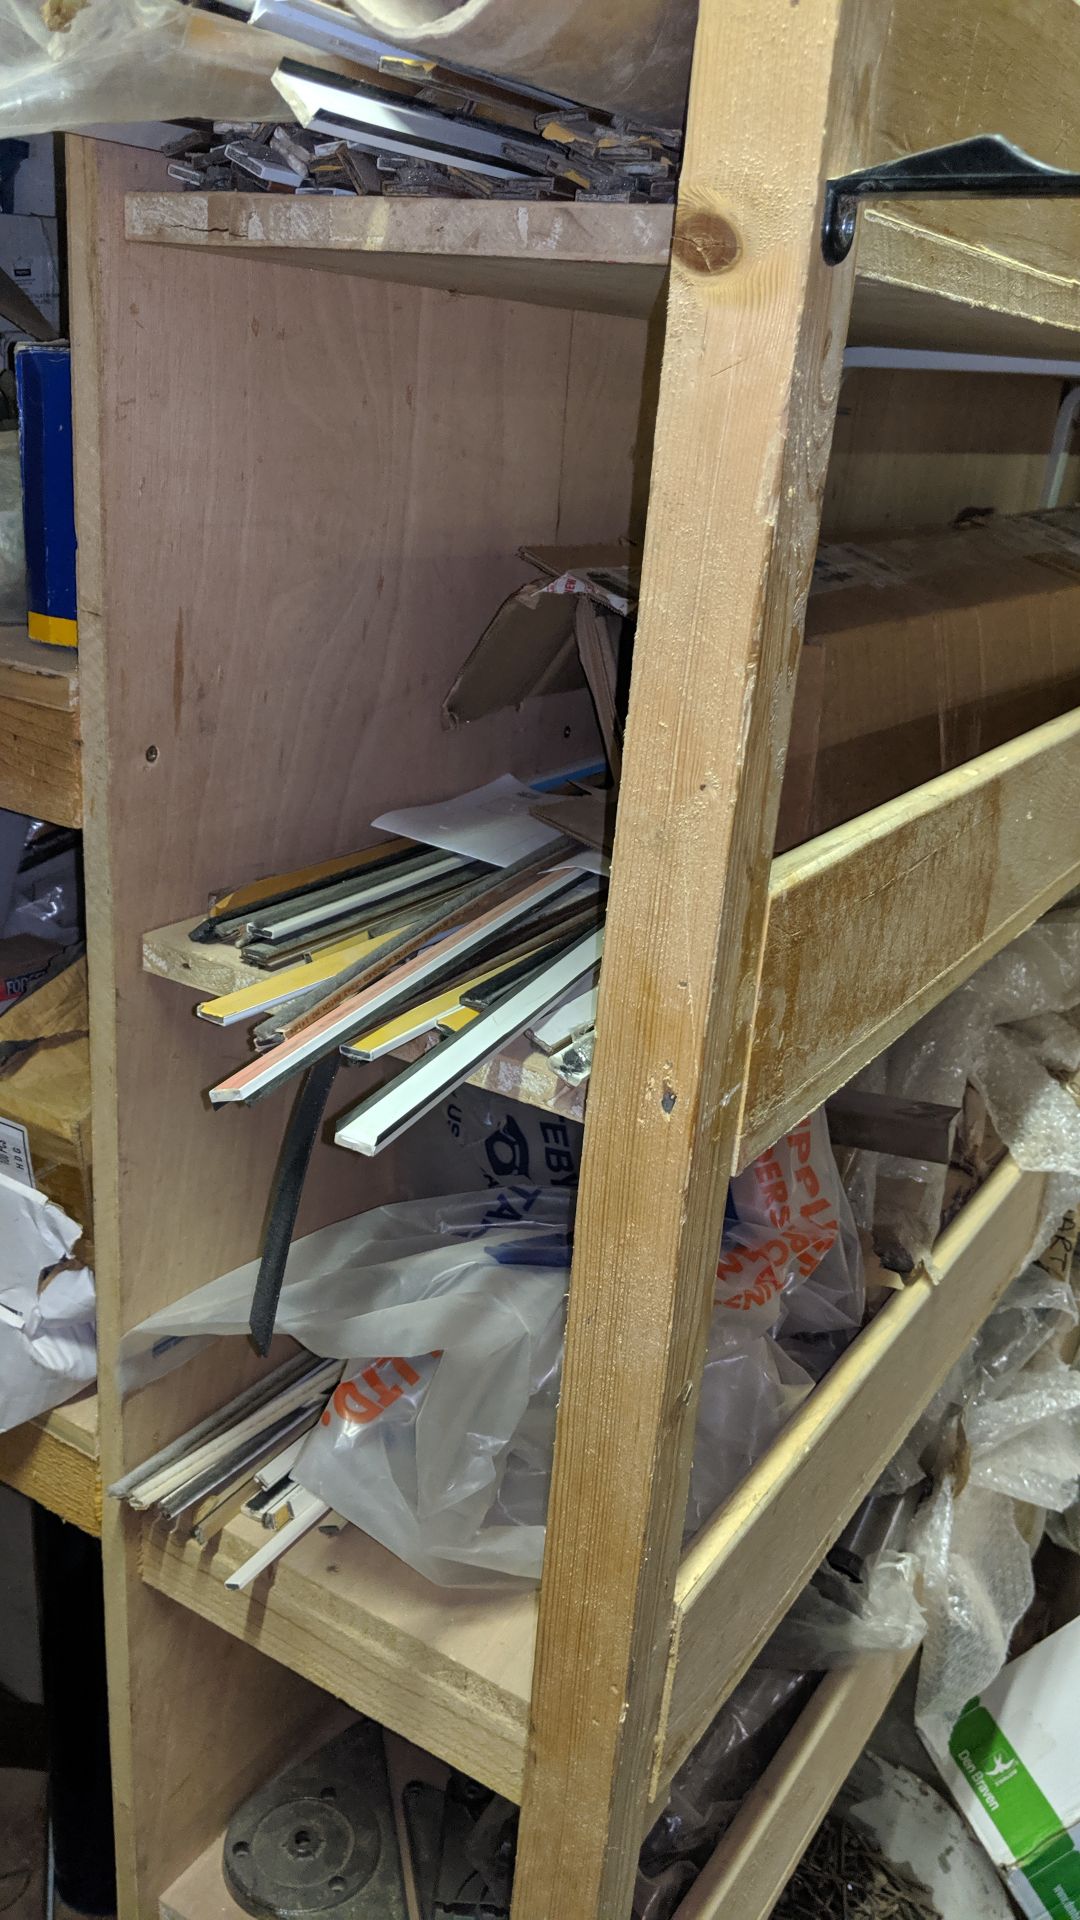 Complete contents of the stockroom including door closers, hinges, handles, fixings, drawer runners, - Image 22 of 29